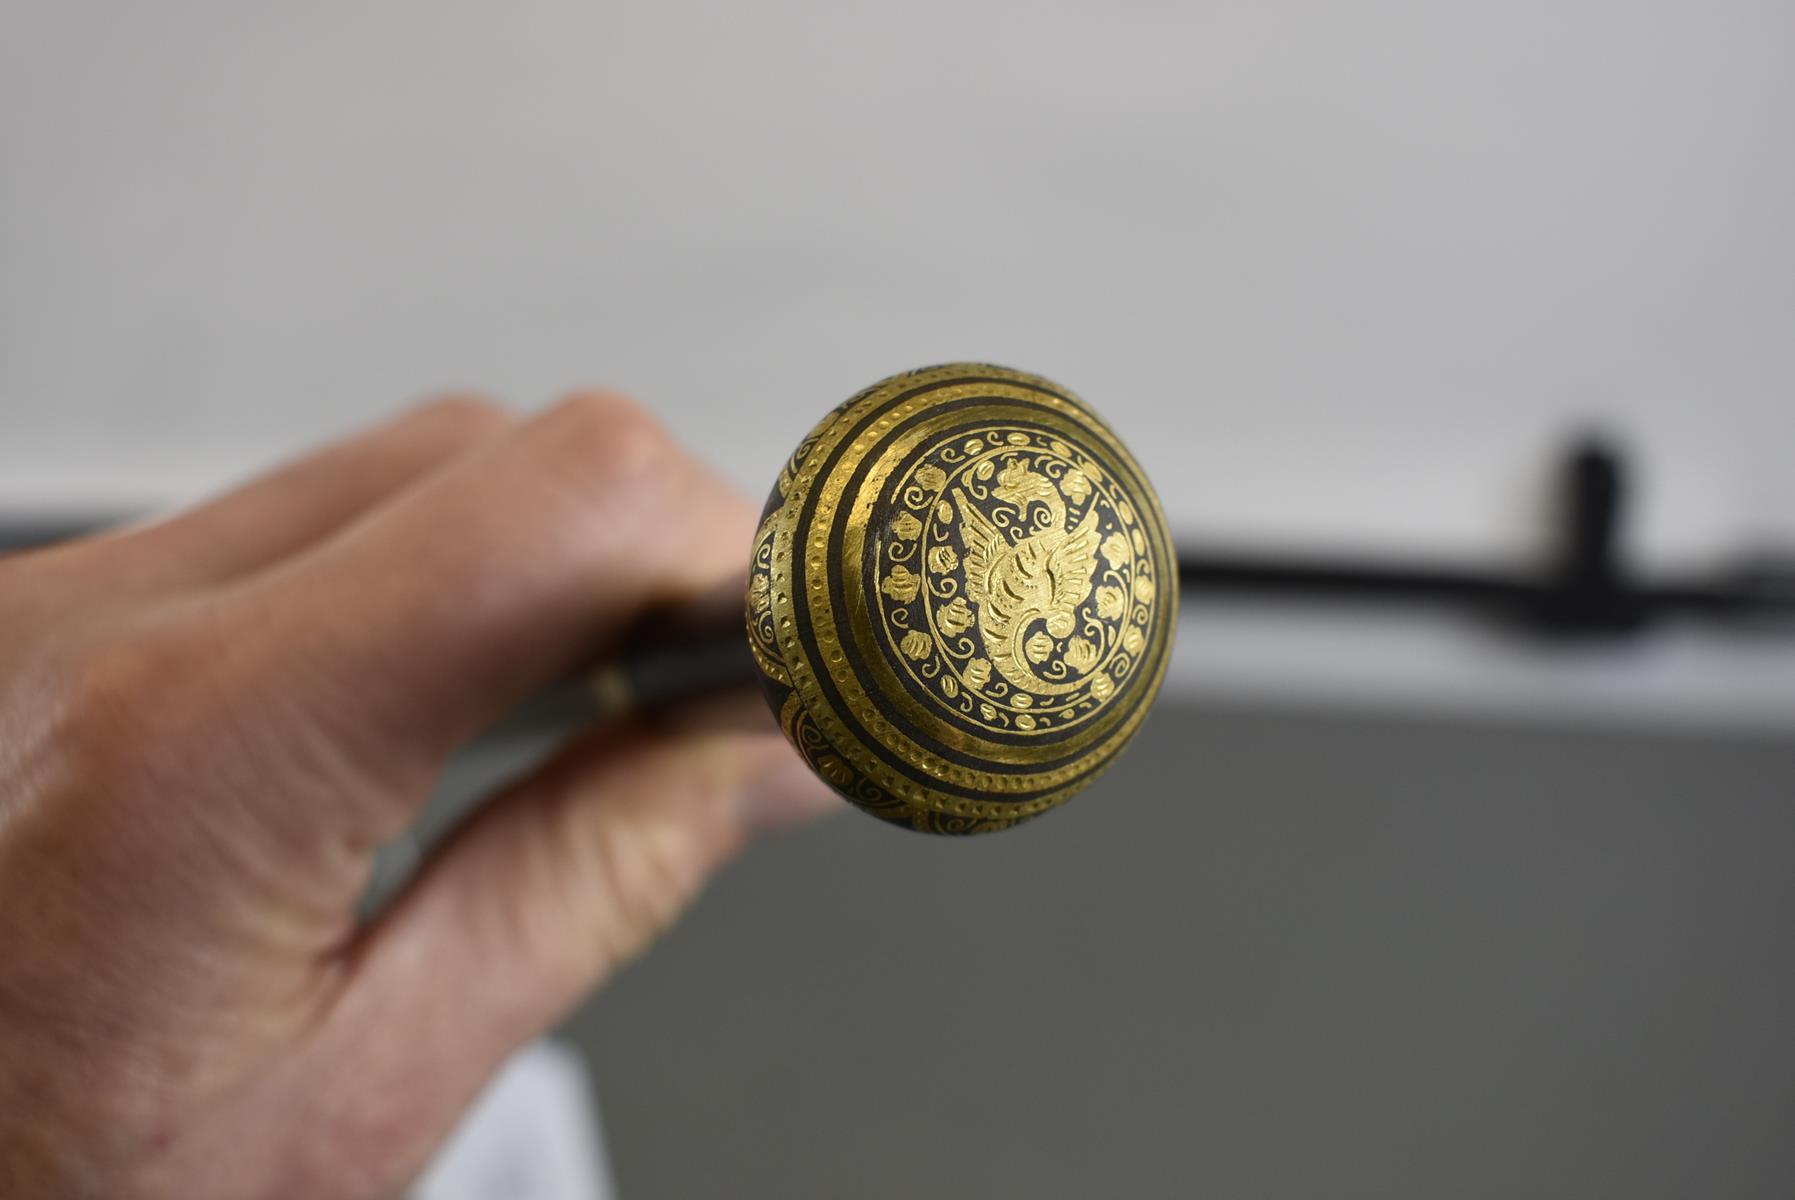 A FINE 19TH CENTURY RHINOCEROS AND GOLD HIGHLIGHTED OFFICER'S SWAGGER STICK OF THE ROYAL SCOTS - Image 5 of 11